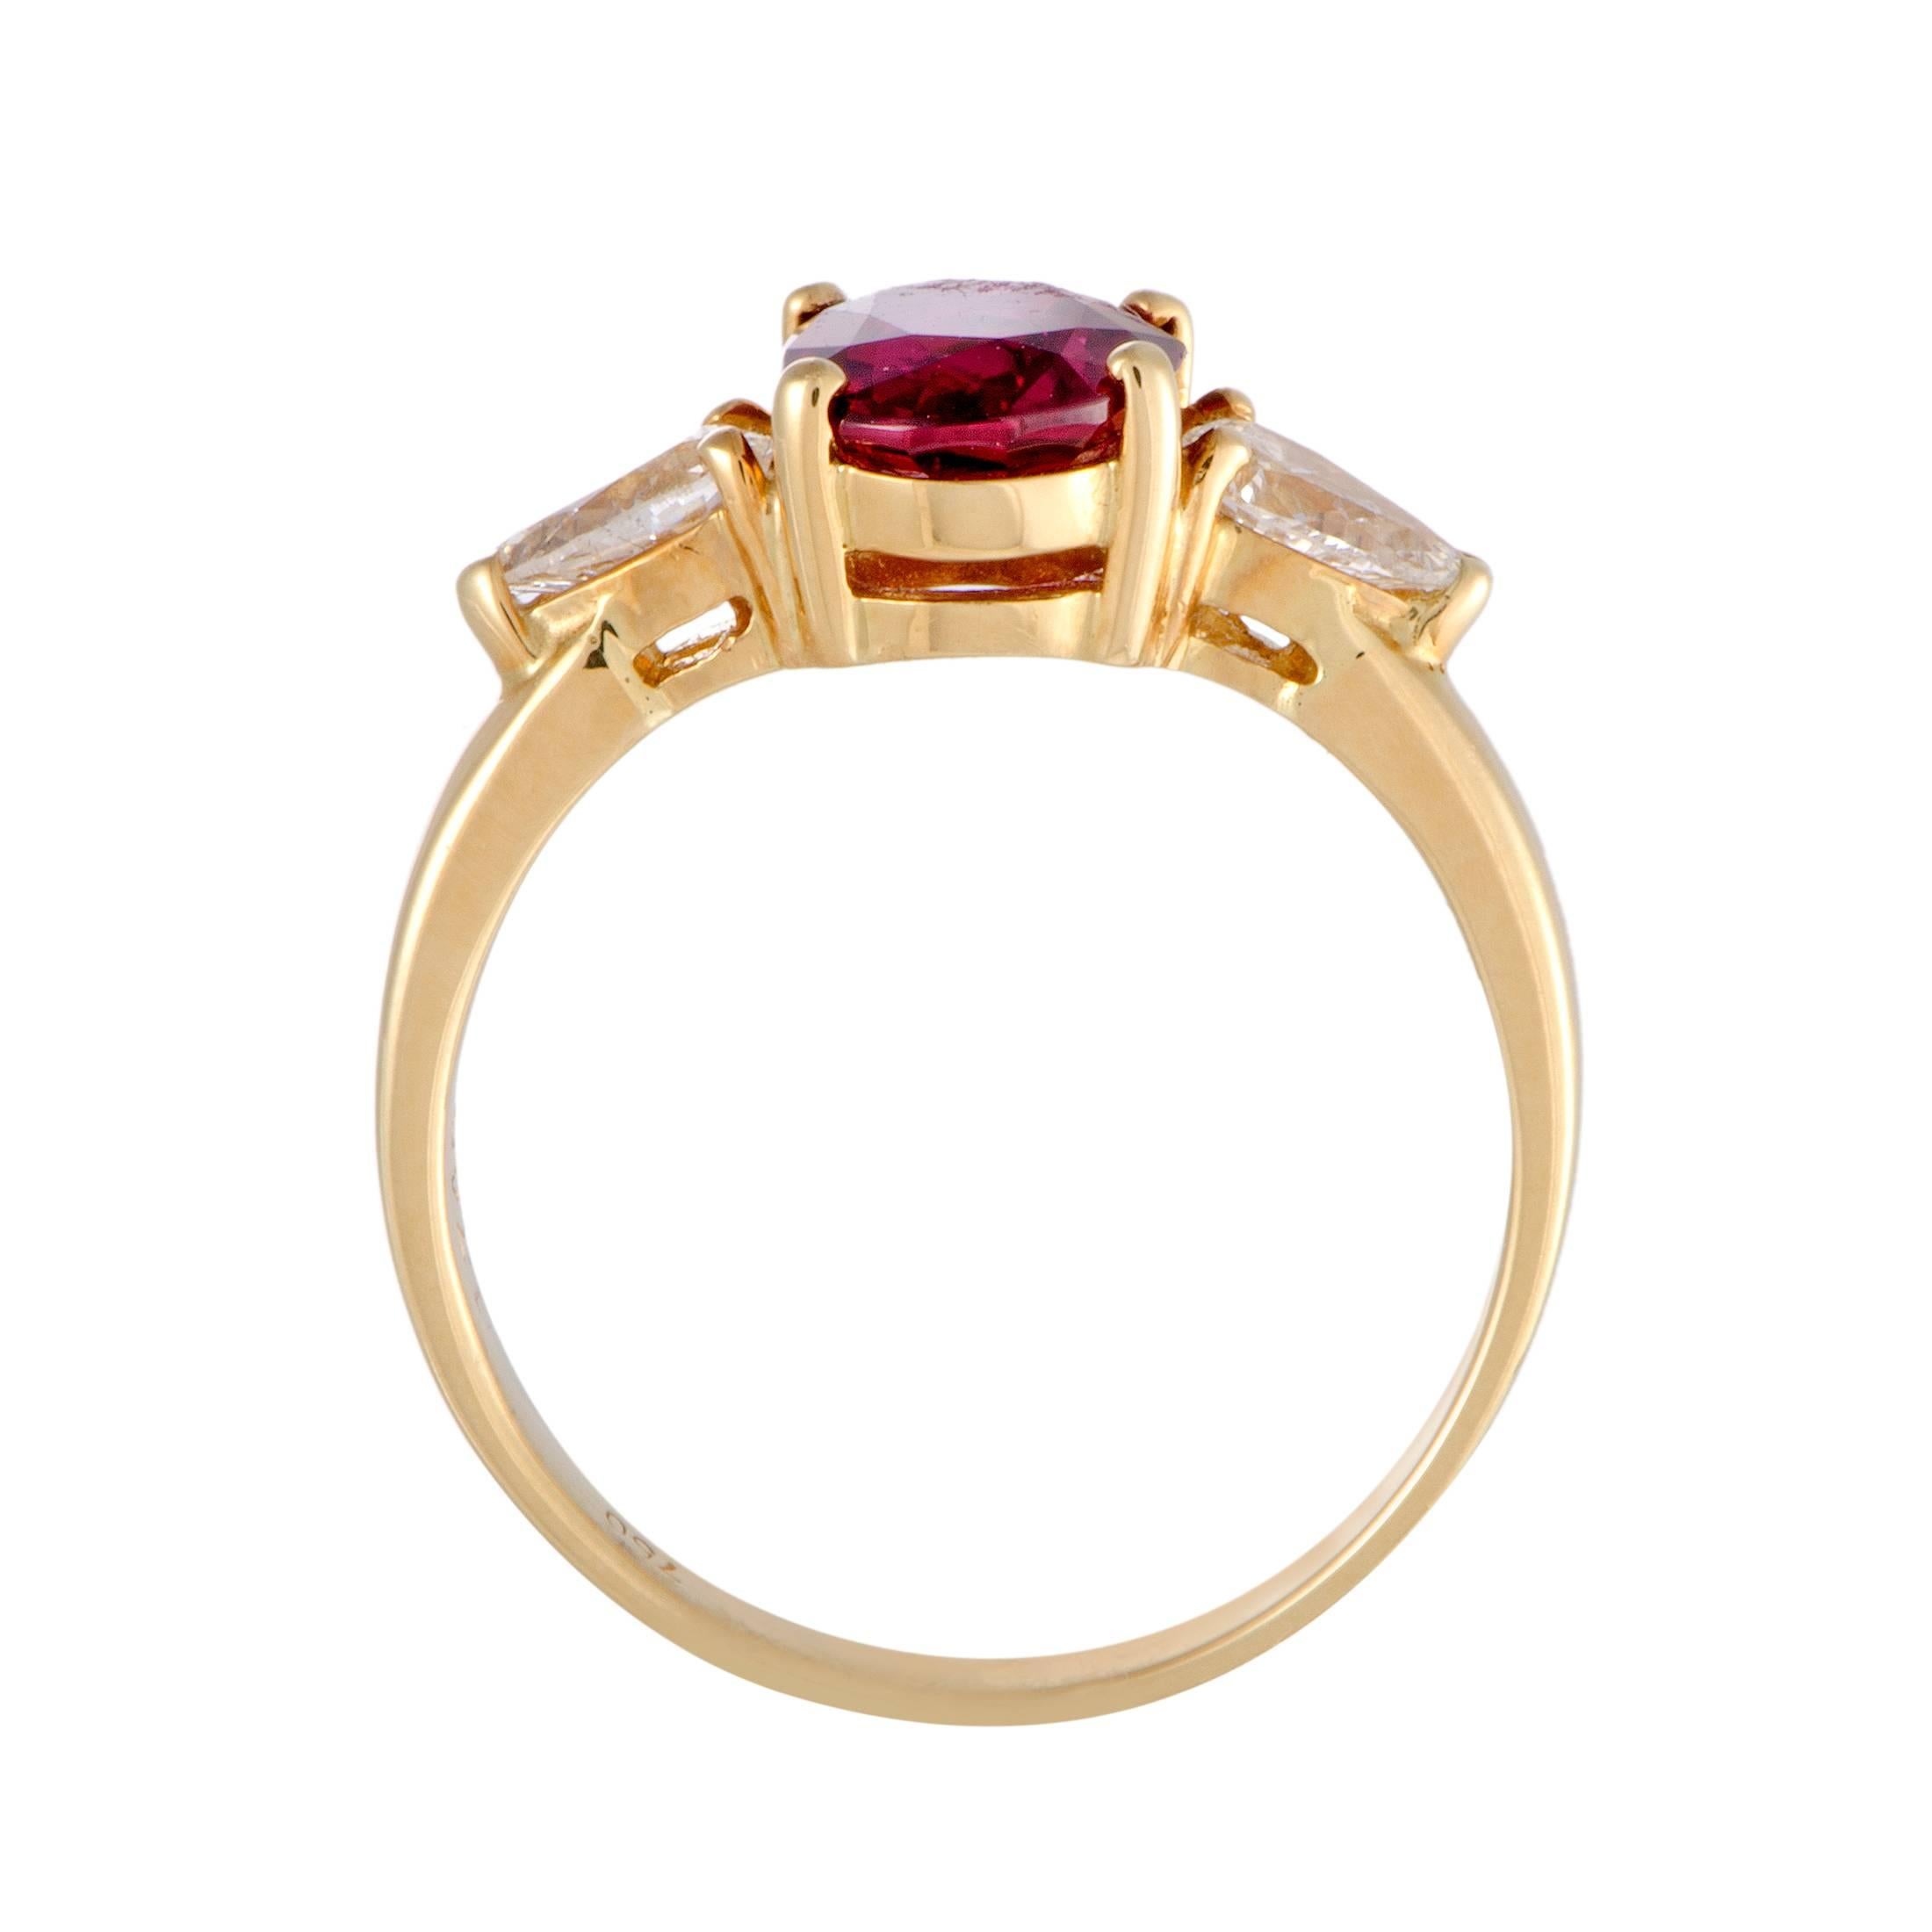 This ring is made of elegant 18K yellow gold and boasts an exquisitely classy appeal thanks to the understated design and décor. The ring is set with a sublime 1.74ct ruby, accompanied on each side by diamonds that weigh in total 0.57 carats.
Ring